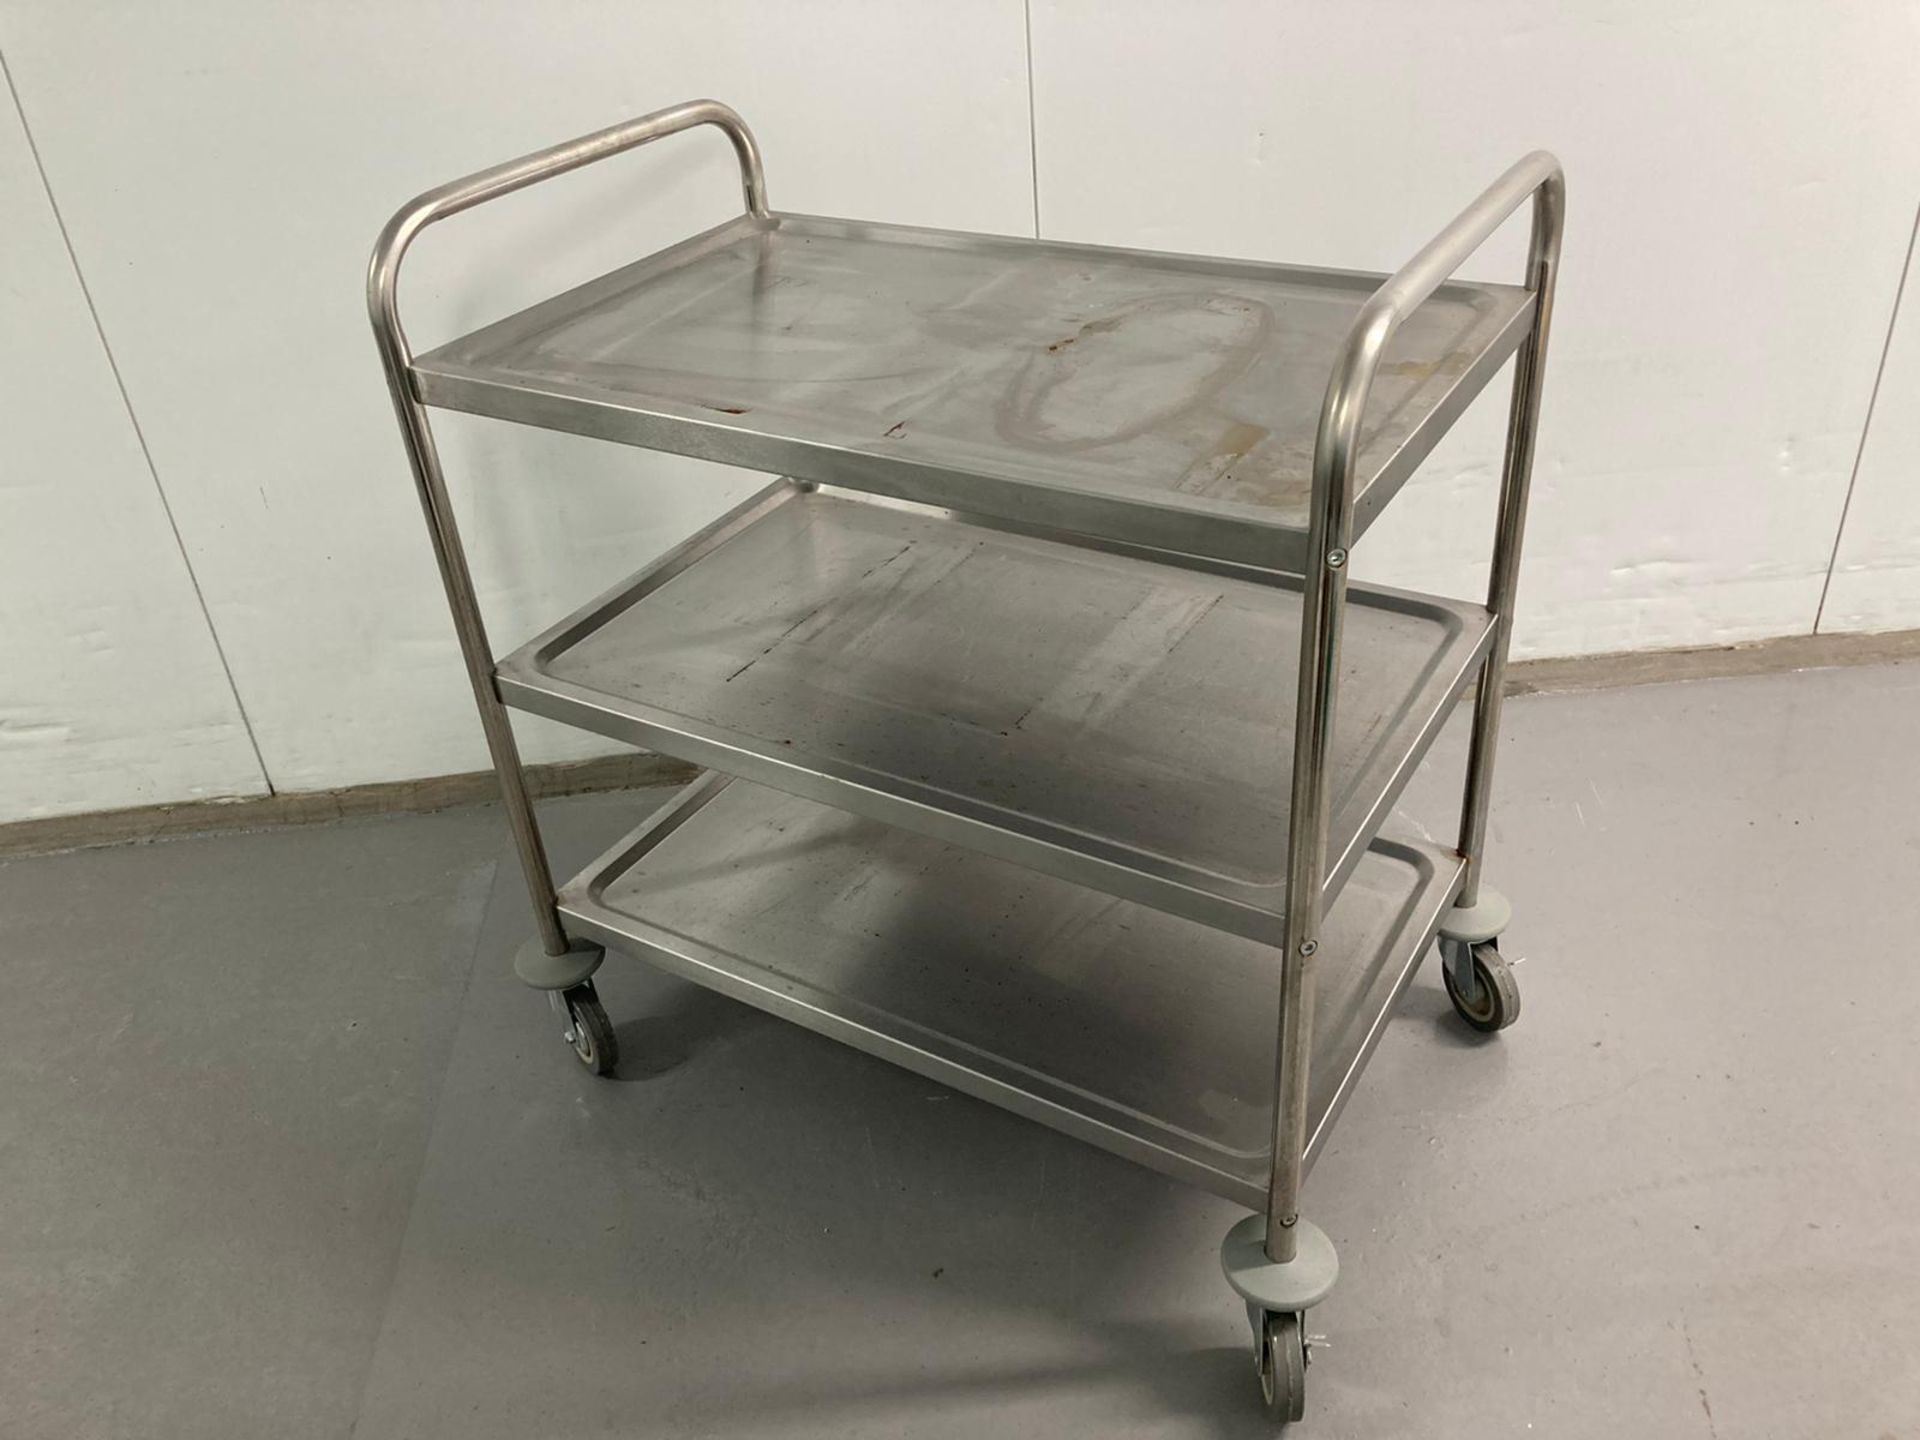 Vogue Stainless Steel Trolley - Image 4 of 5